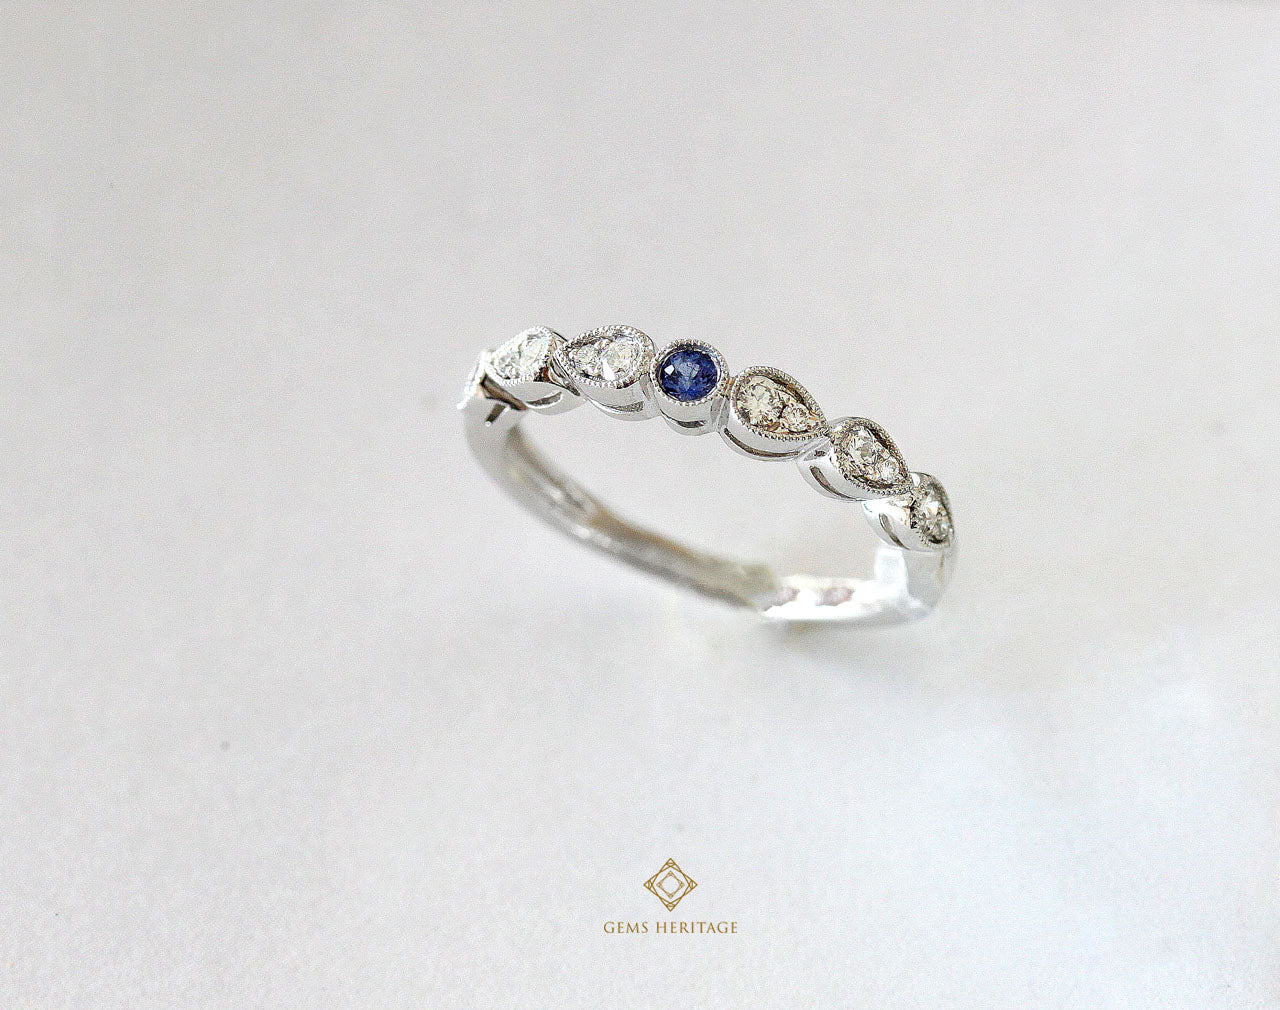 Tiny blue sapphire in a diamond ring